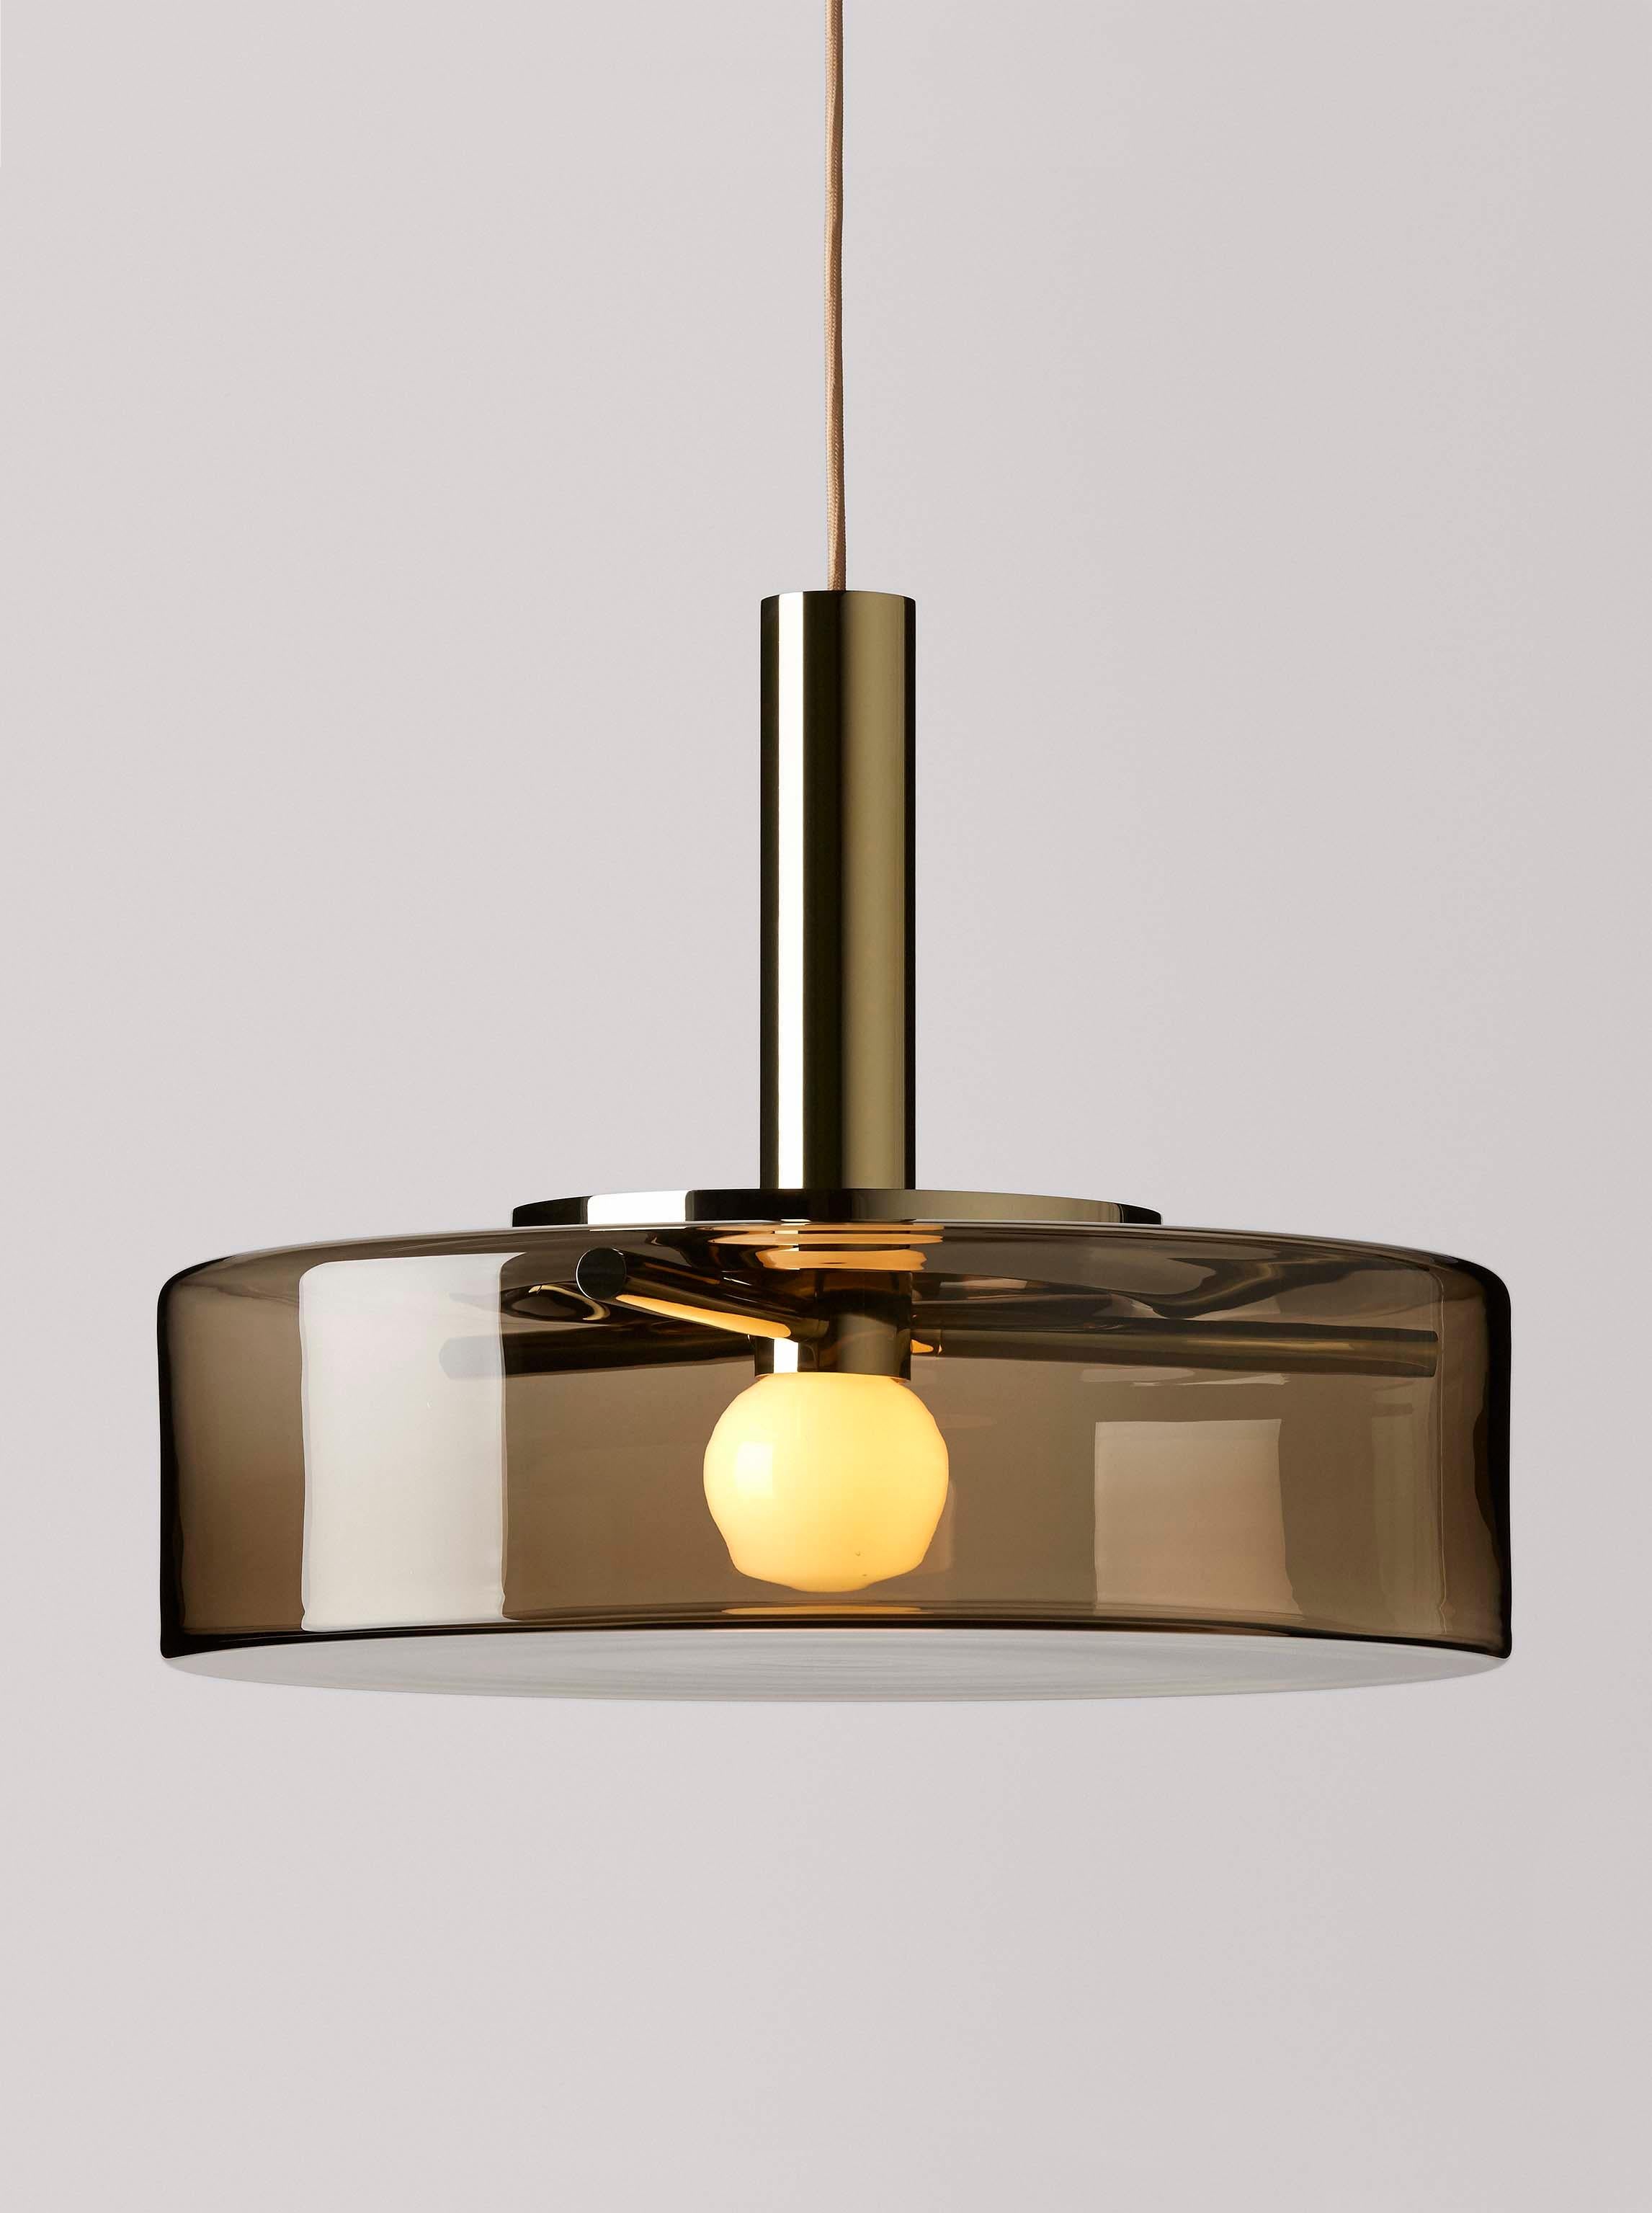 Set of 2 smoke grey pendant light by Dechem Studio
Dimensions: D 56 x H 180 cm
Materials: brass, glass.
Also available: different colours and sizes available

Named after the series of successful Czechoslovak science satellites that orbited the